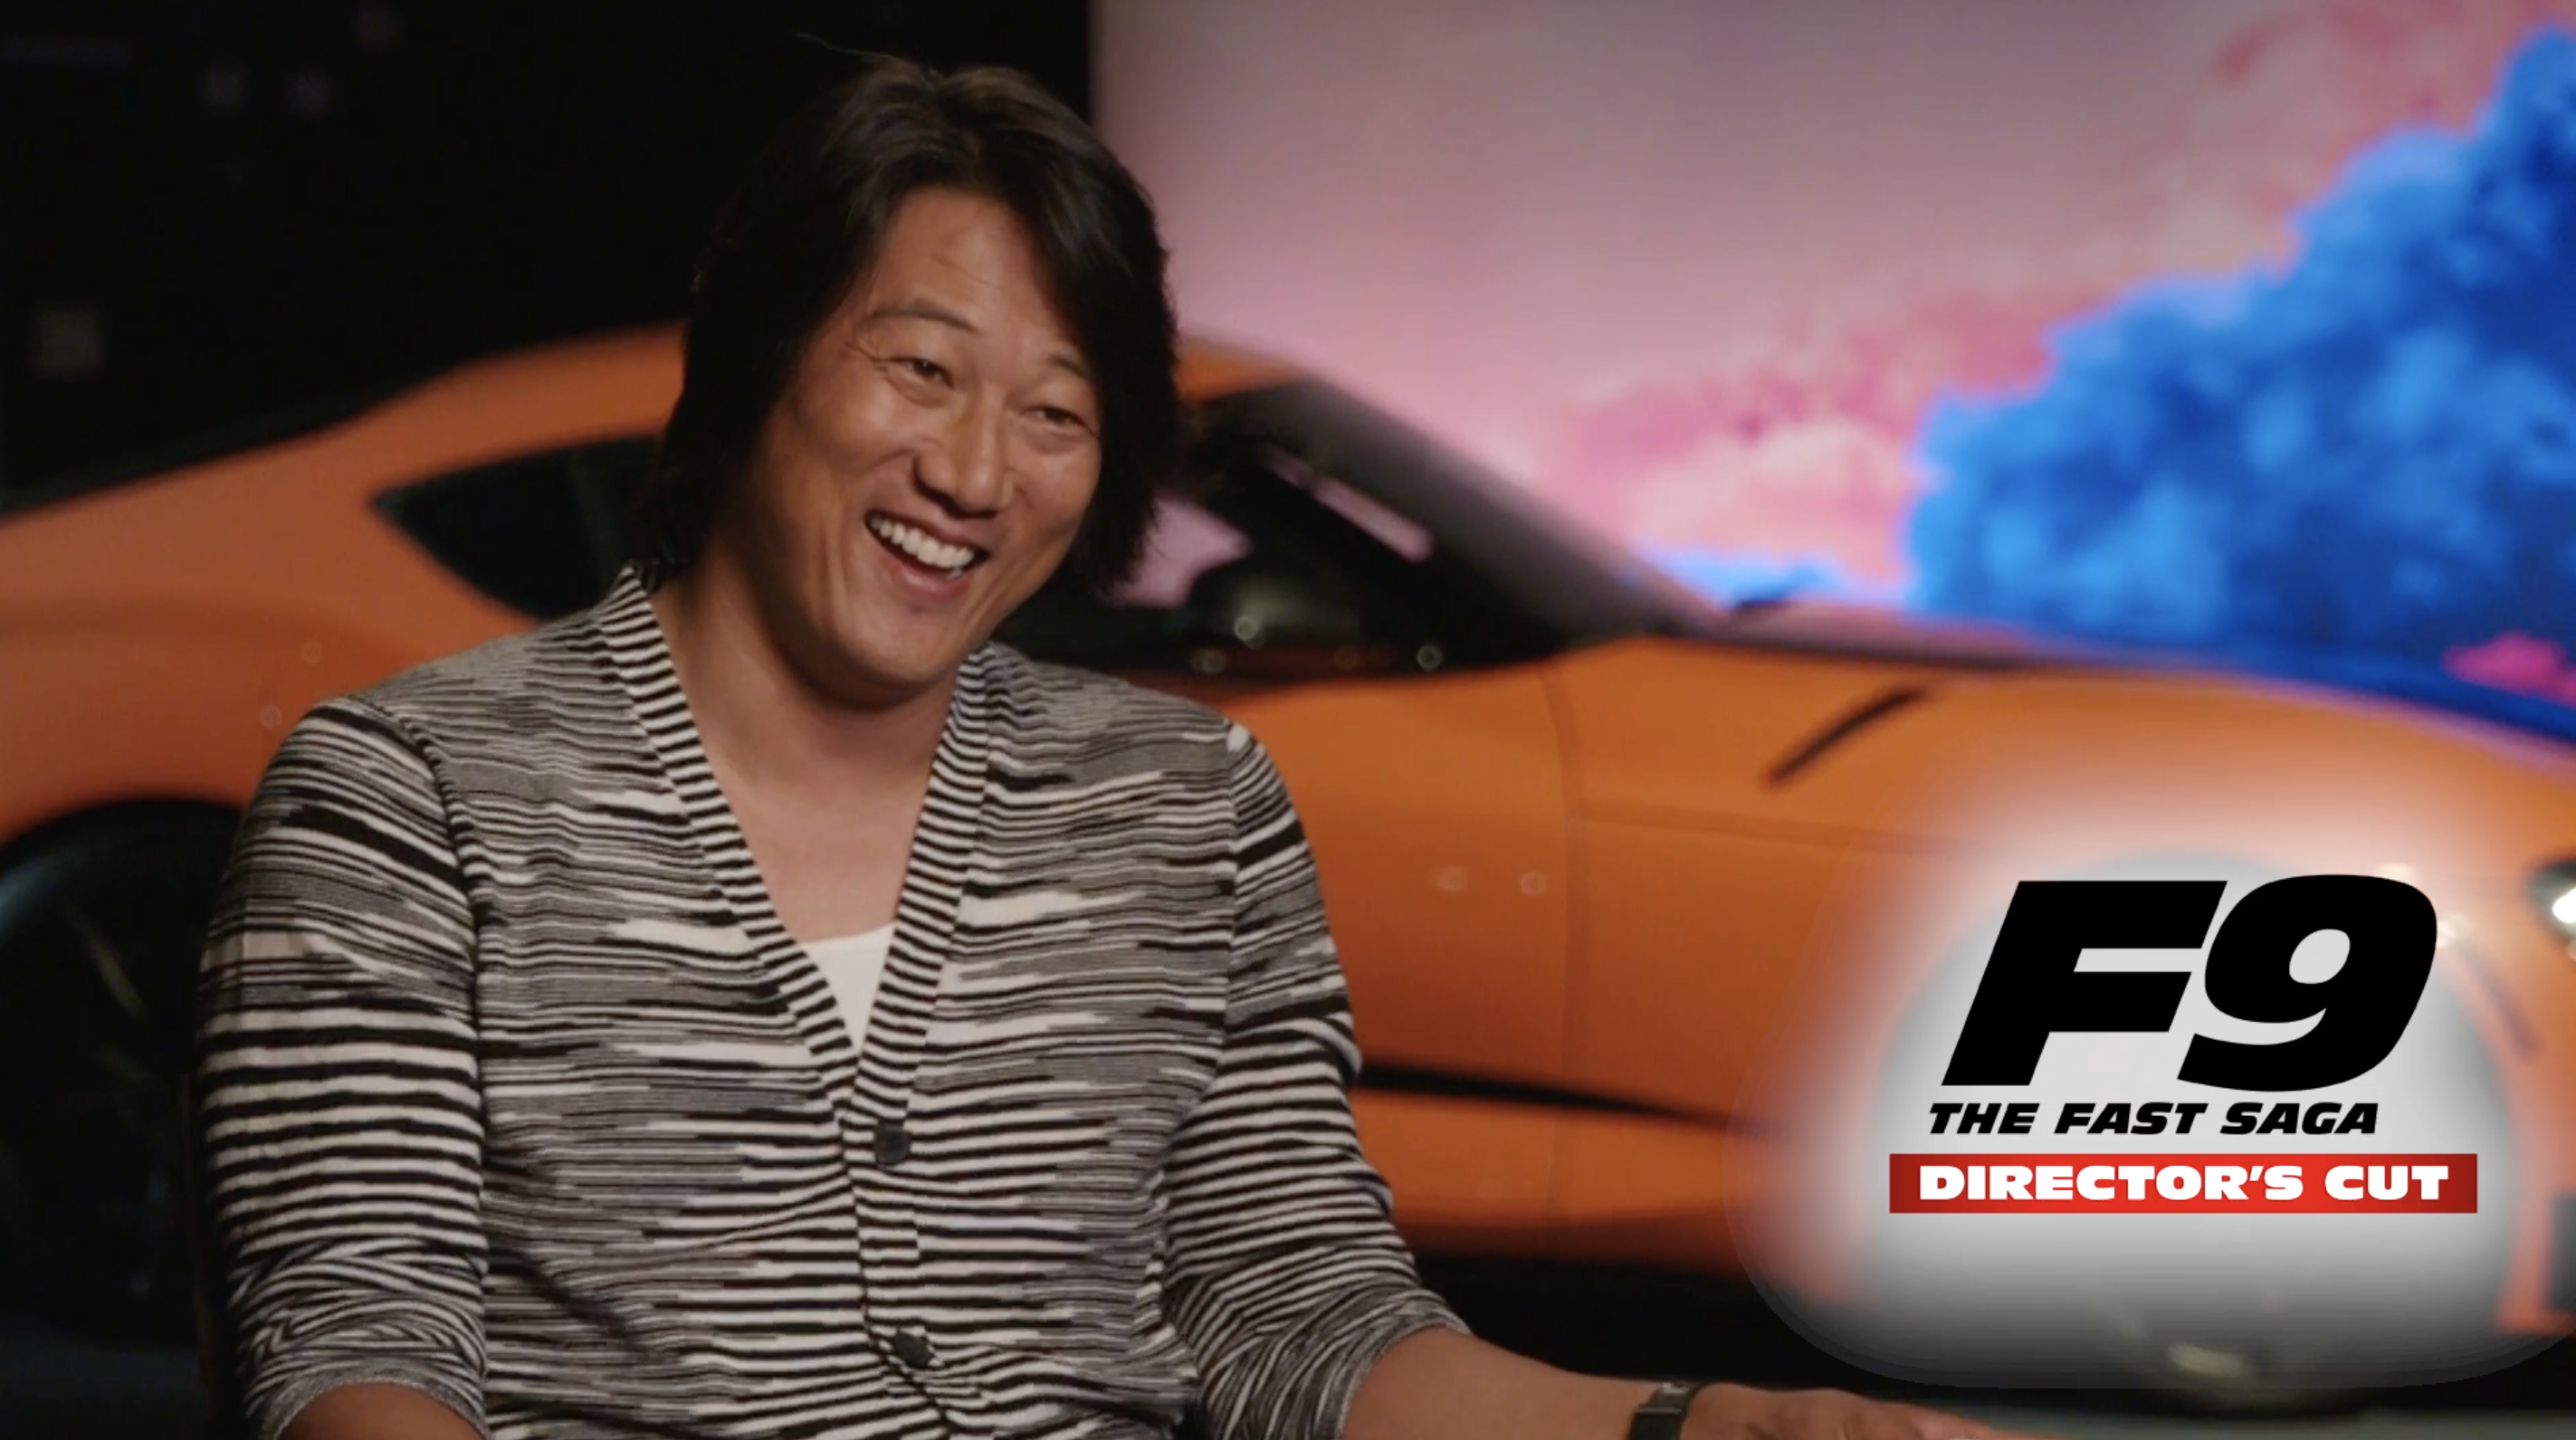 Sung Kang F9 Justice for Han